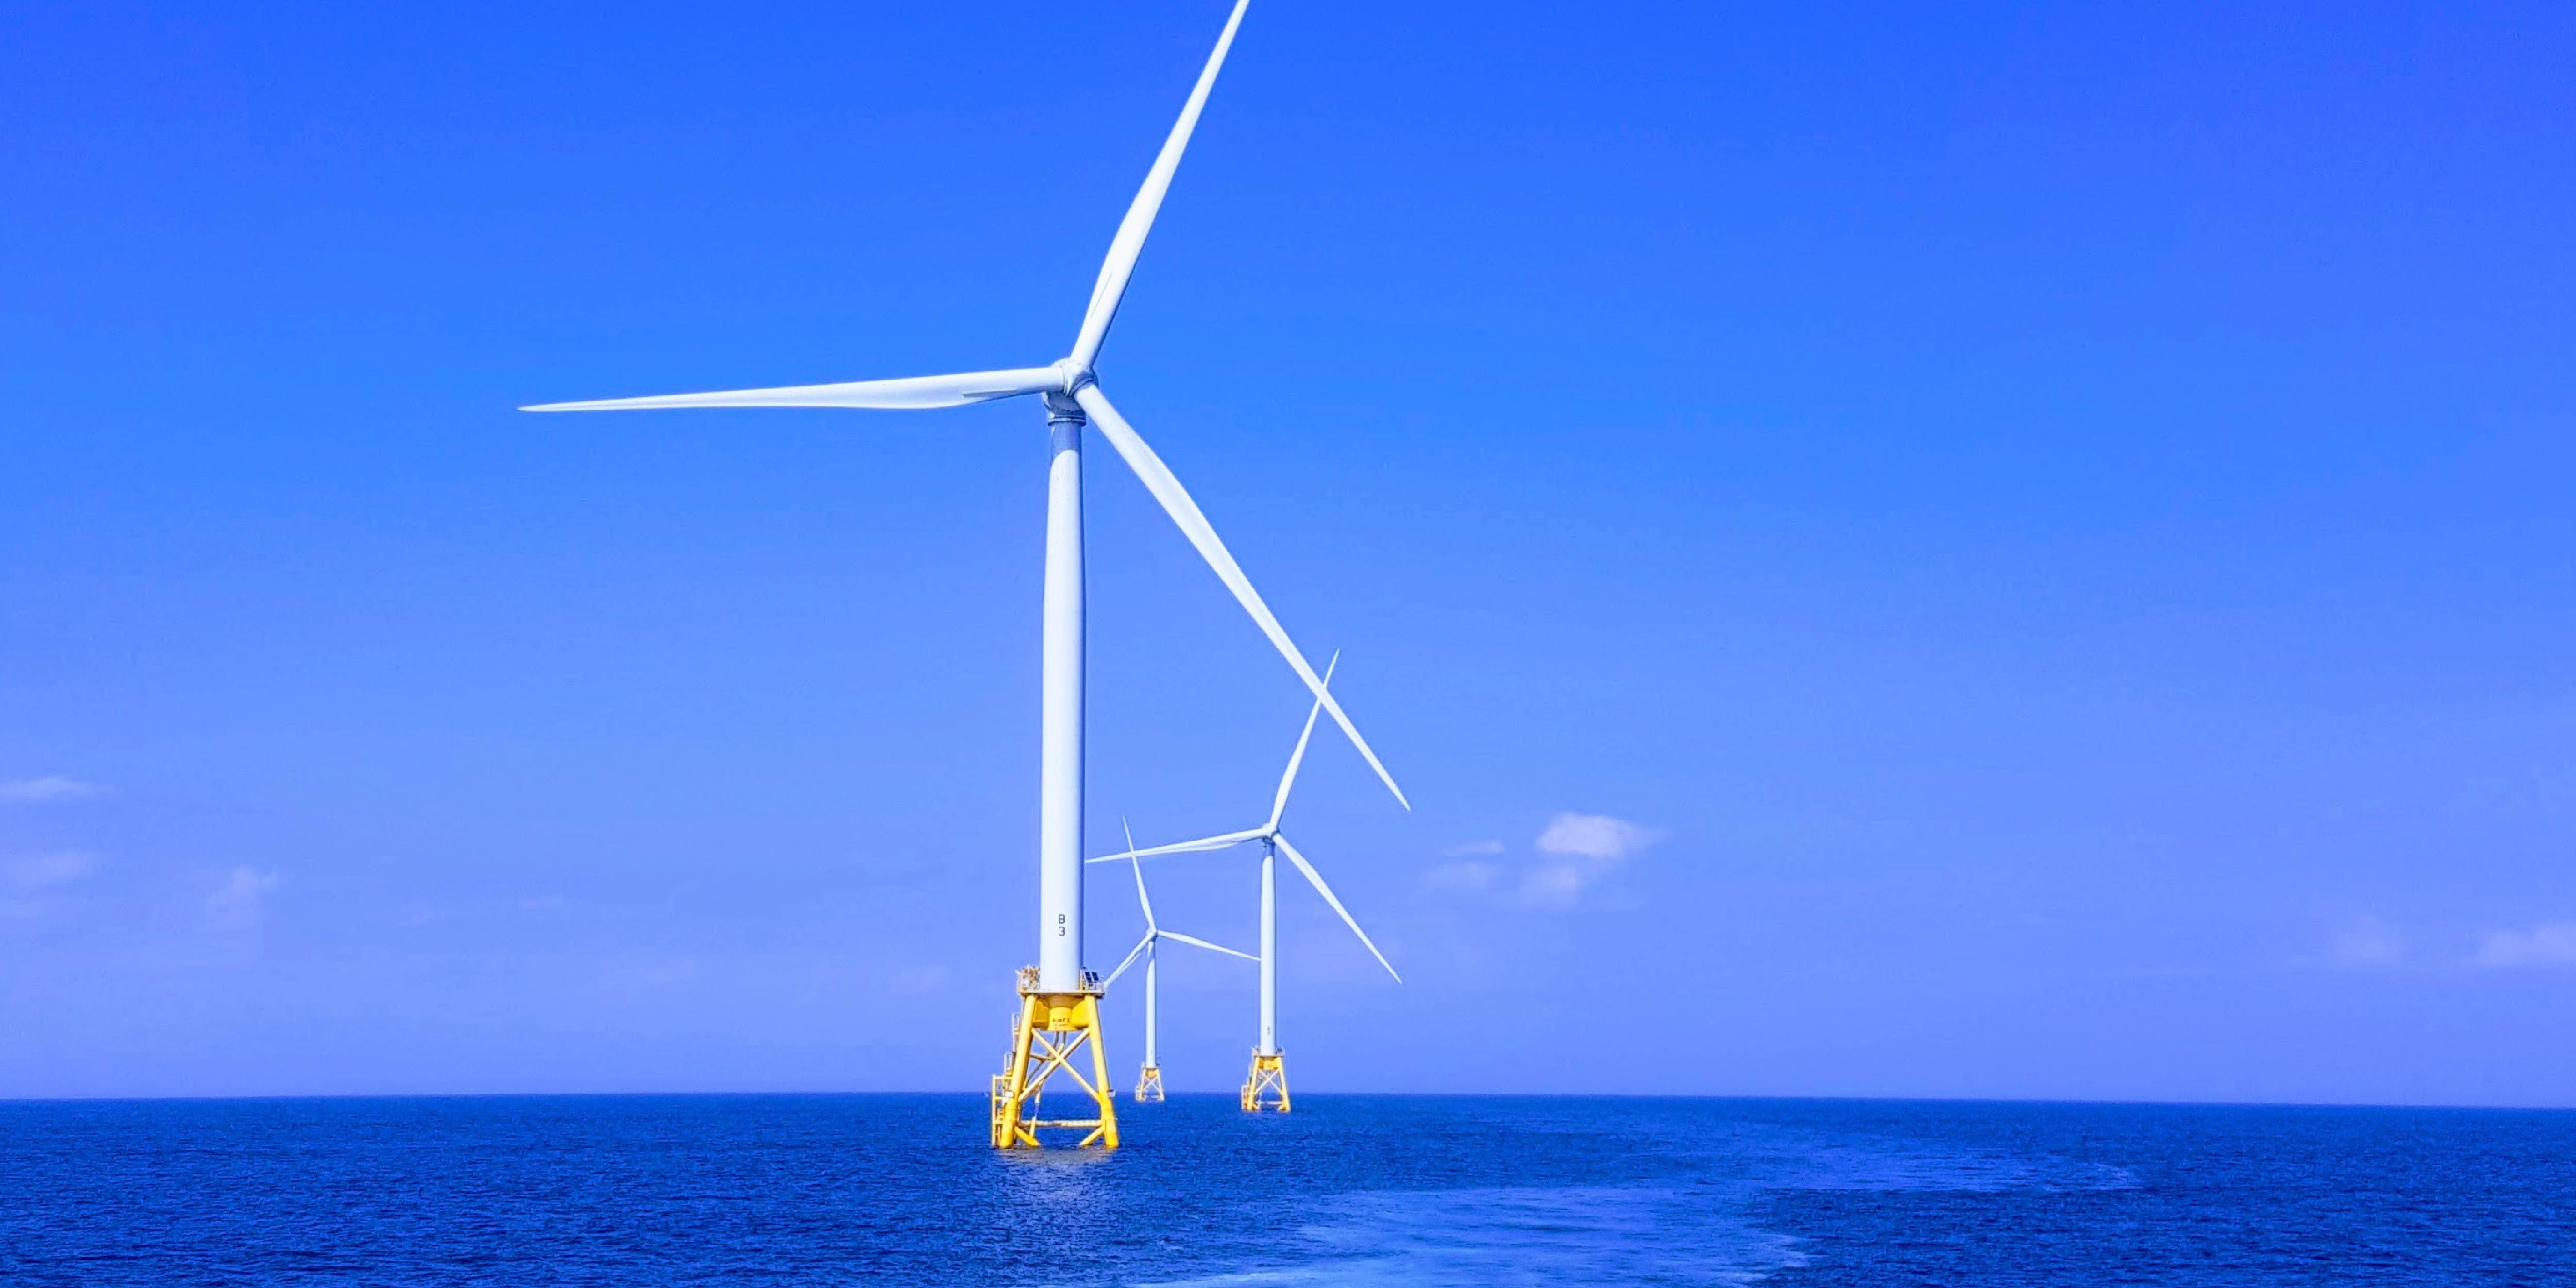 Offshore wind turbine set against a bright blue sky